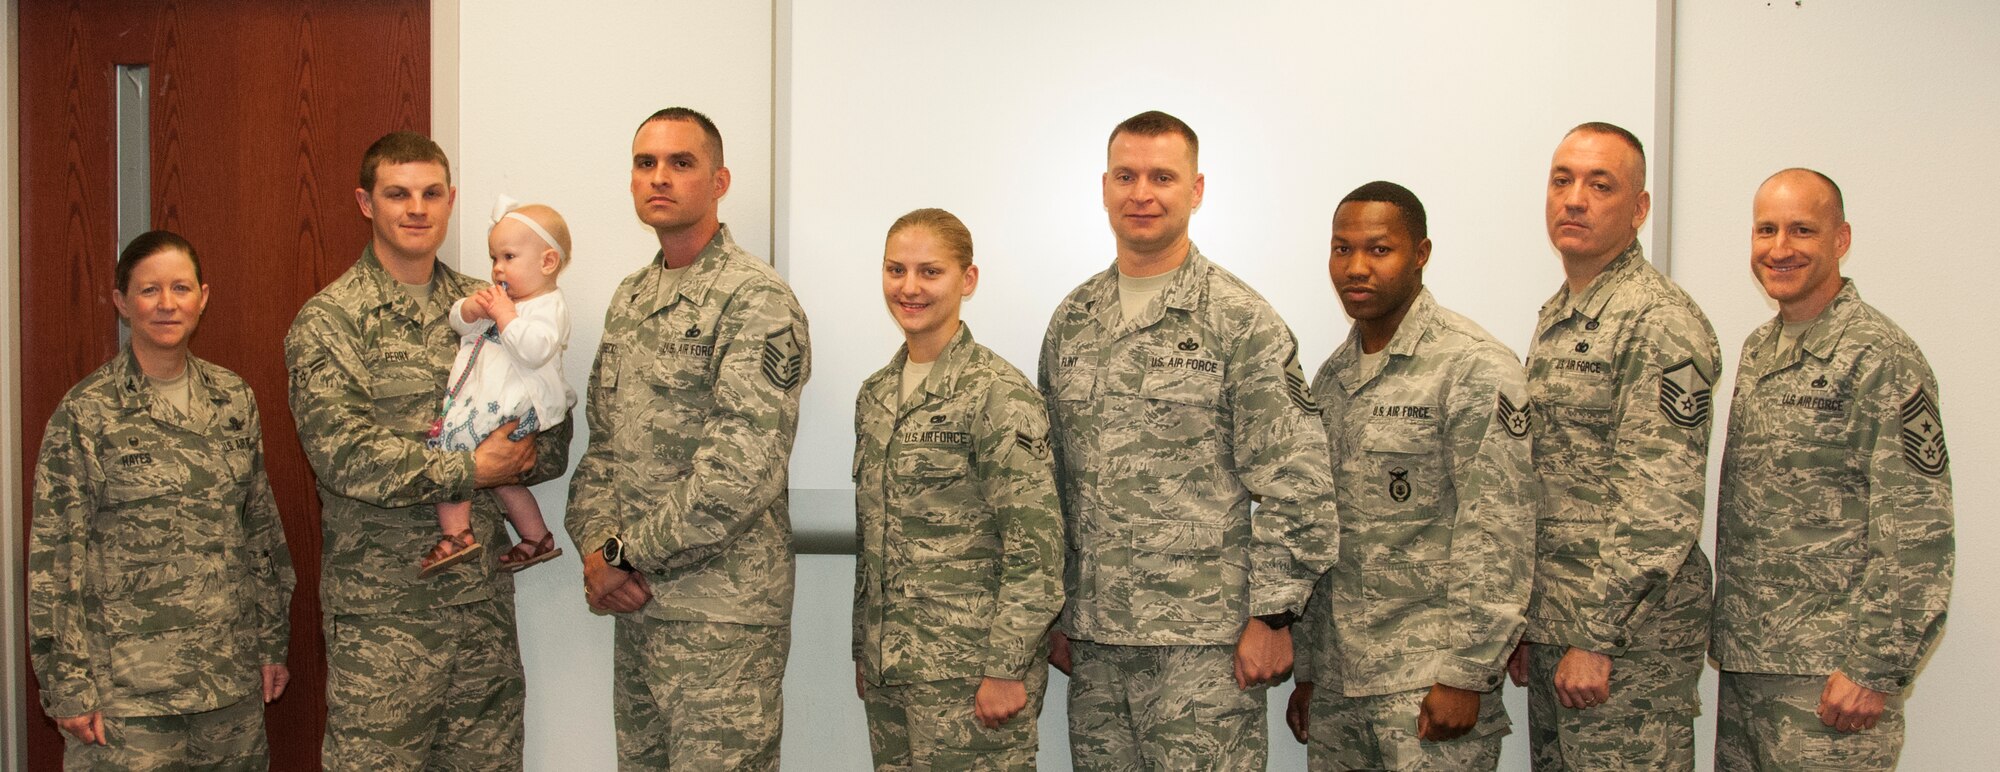 Ninetieth Missile Wing first sergeants' Diamond Sharp Award winners pose with Col. Tracey Hayes, 90th MW commander; Chief Master Sgt. Samuel Couch, 90th MW command chief, and the winners' respective first sergeants during the Diamond Sharp Award presentation May 12, 2015, on F.E. Warren Air Force Base, Wyo. Each month, three first sergeants select an Airman each from their respective squadrons to receive the award. (U.S. Air Force photo by Senior Airman Jason Wiese)